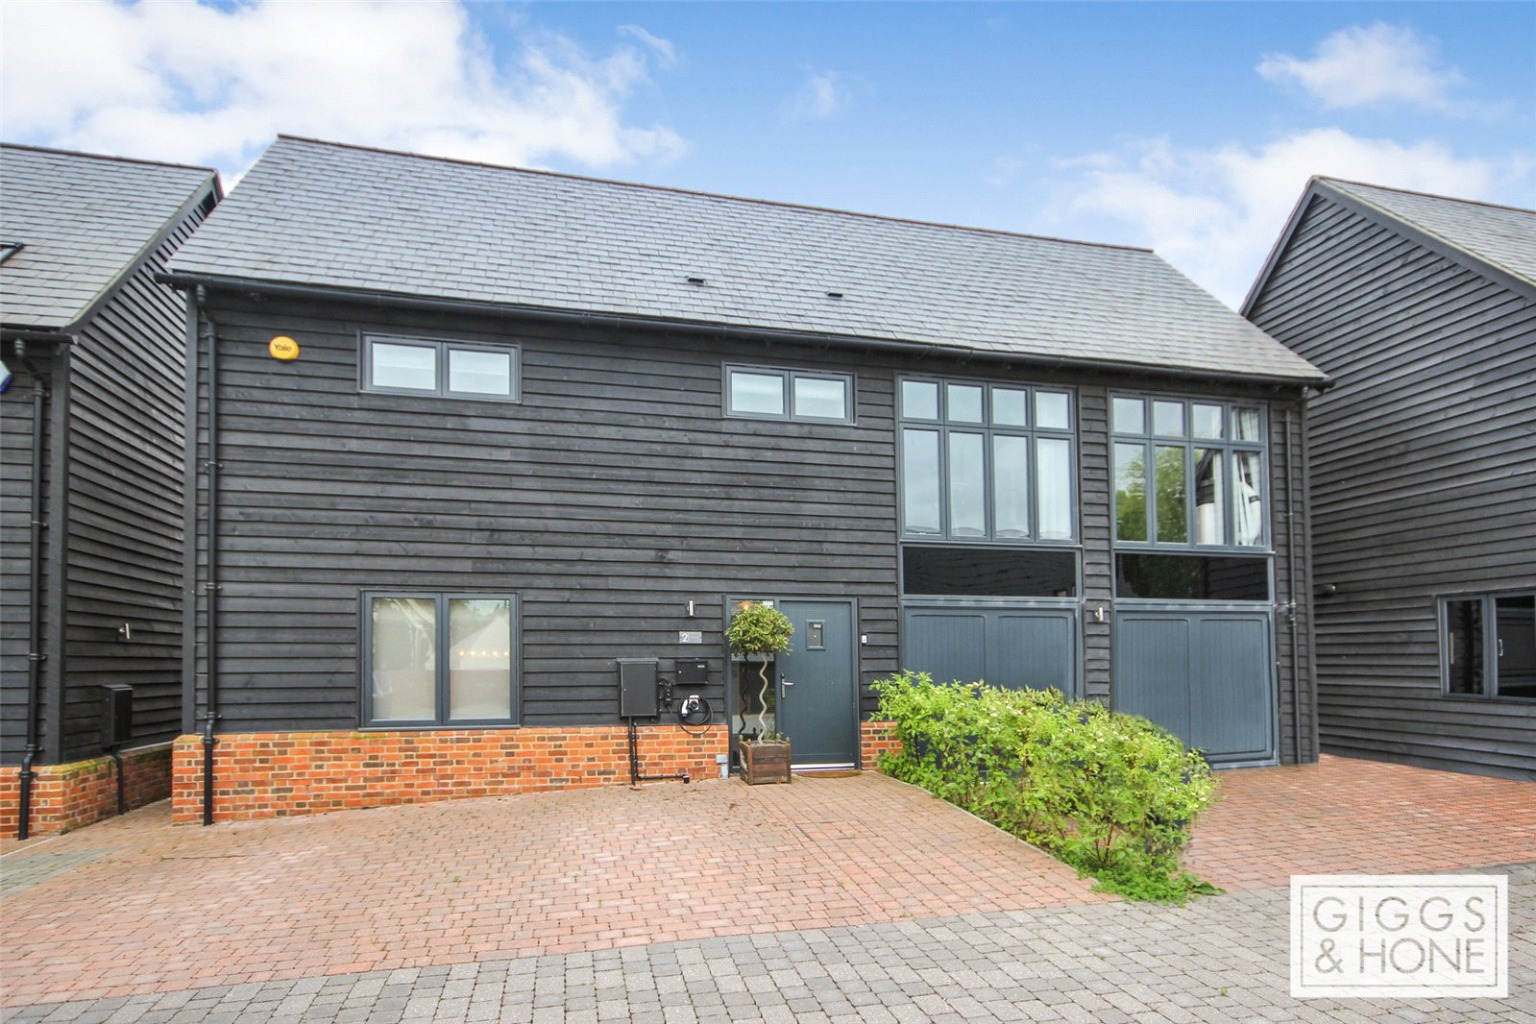 Located within a private courtyard of just five homes and accessed via electric gates, this truly stunning barn conversion which was constructed by Revolution Homes in 2018 benefits from two parking spaces and fitted to a high specification throughout.